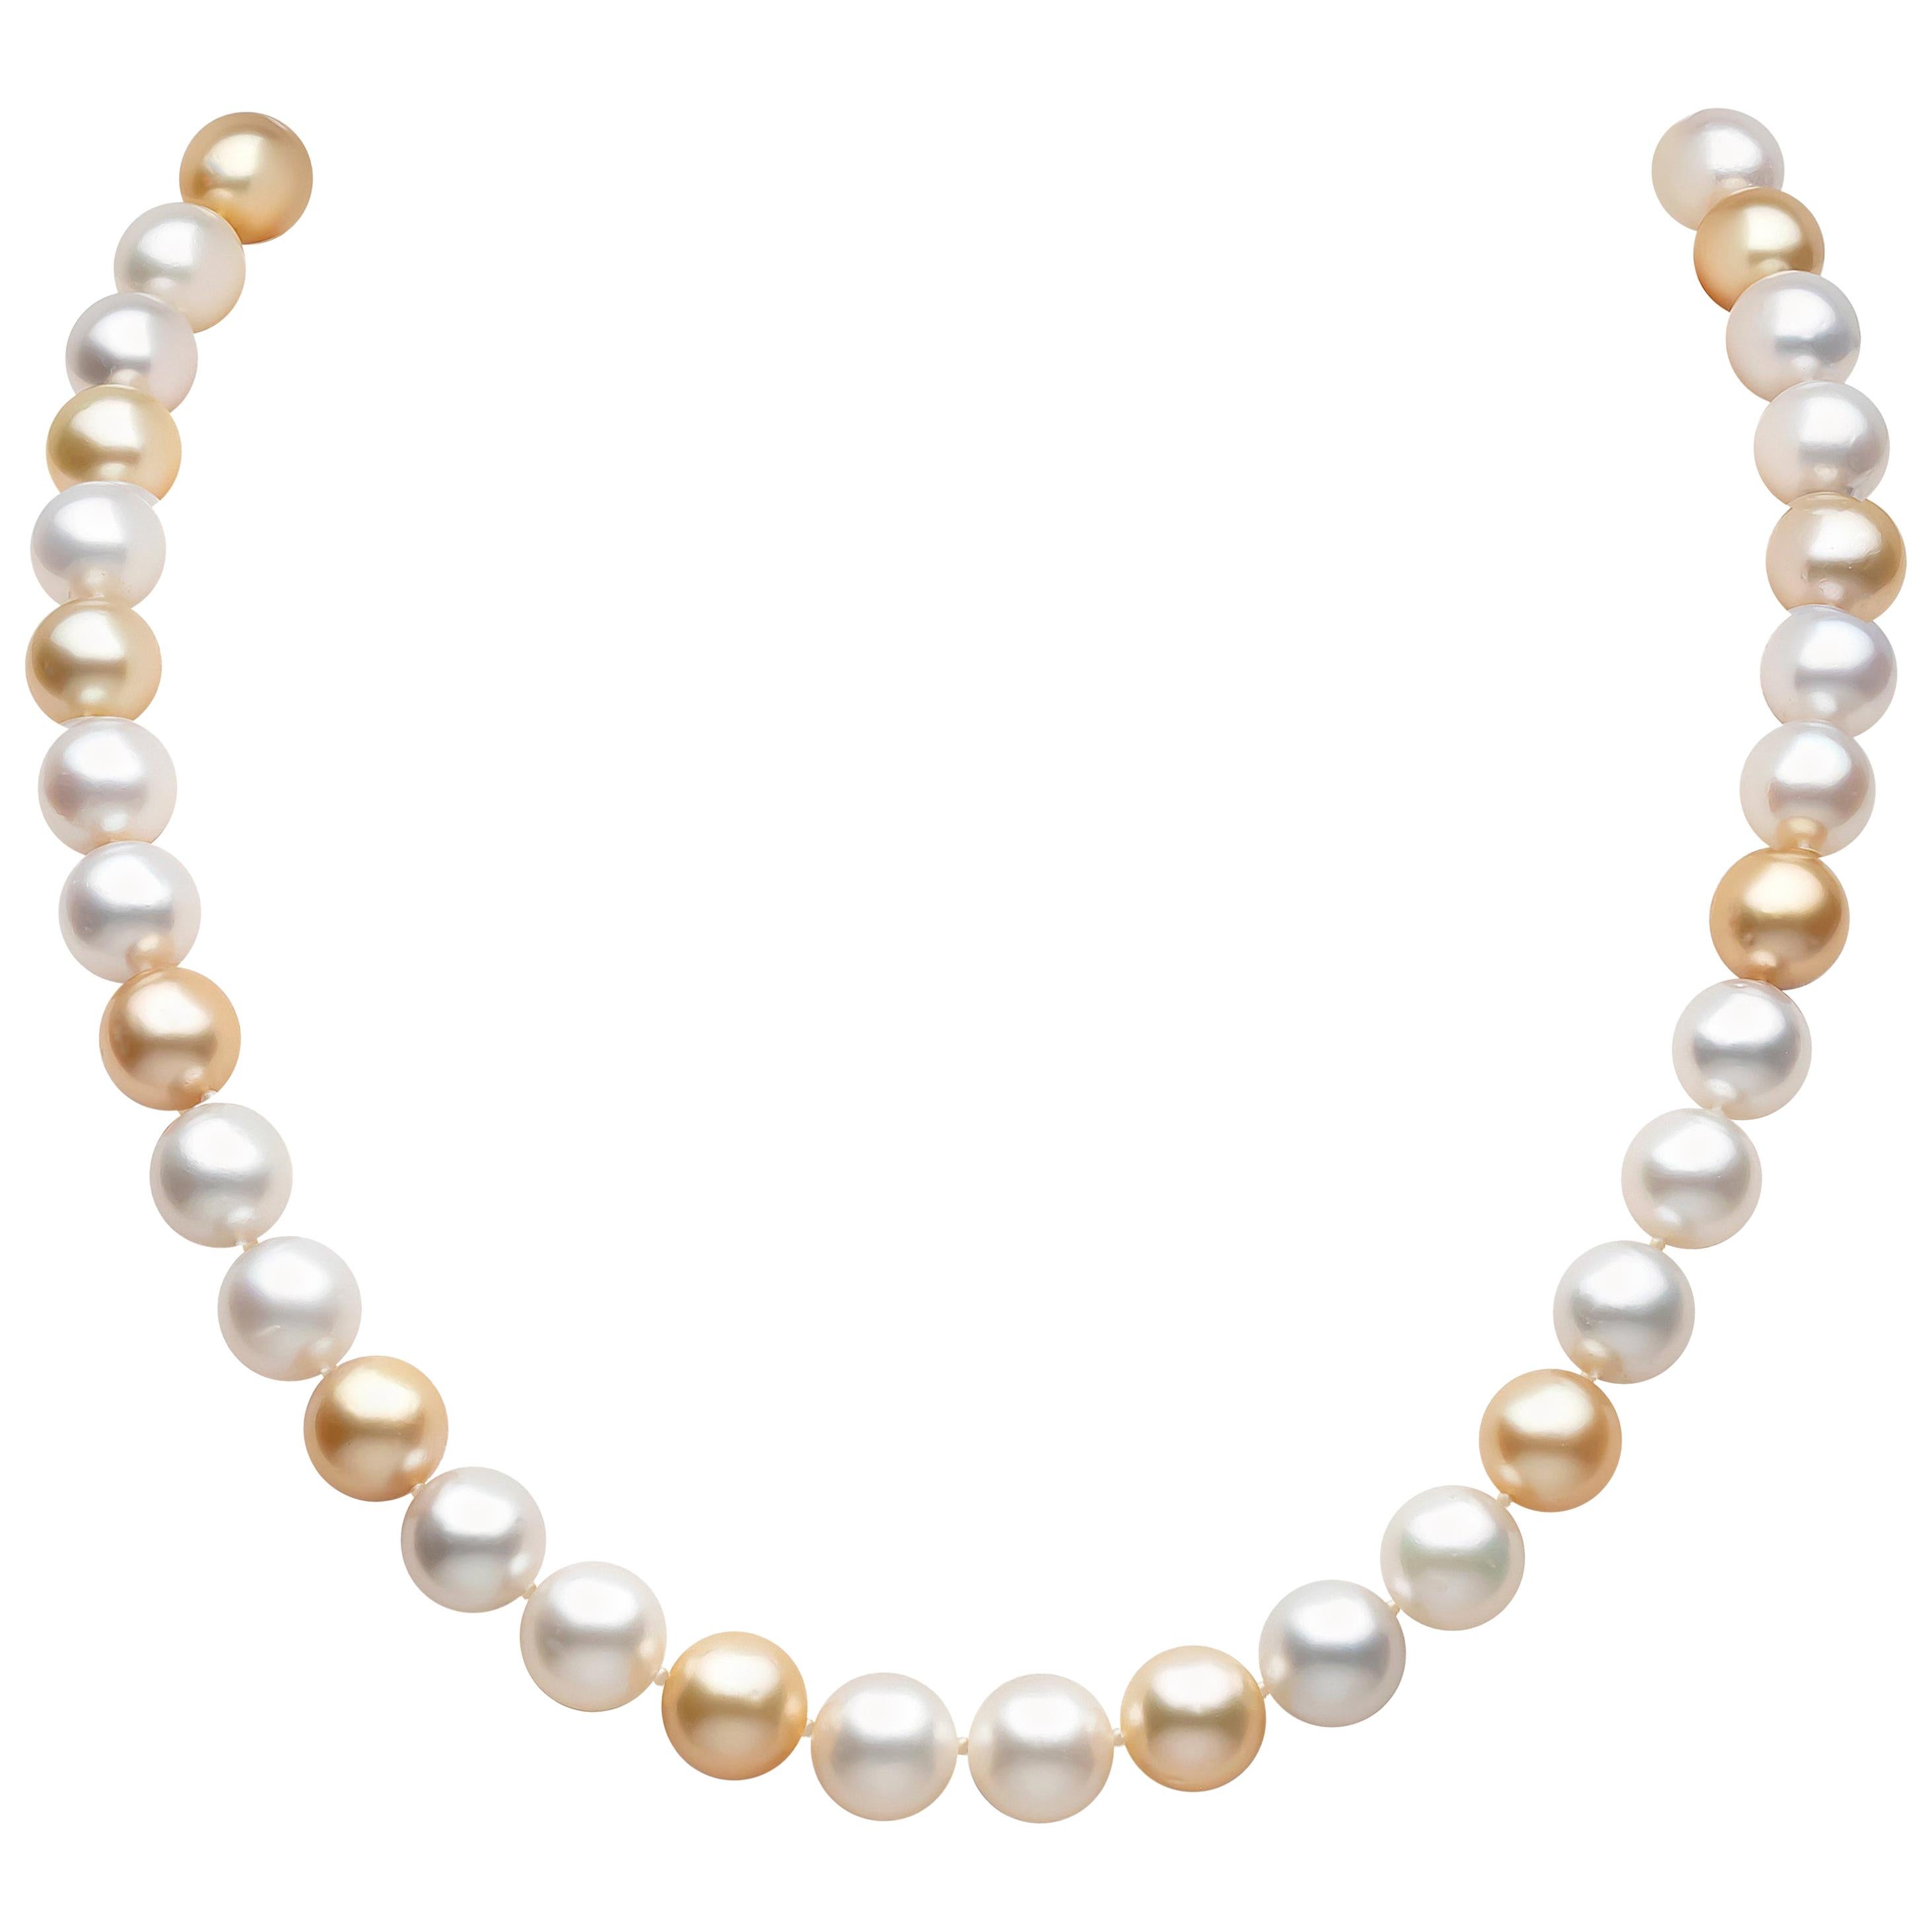 Yoko London White and Golden South Sea Pearl Necklace in 18 Karat Yellow Gold For Sale